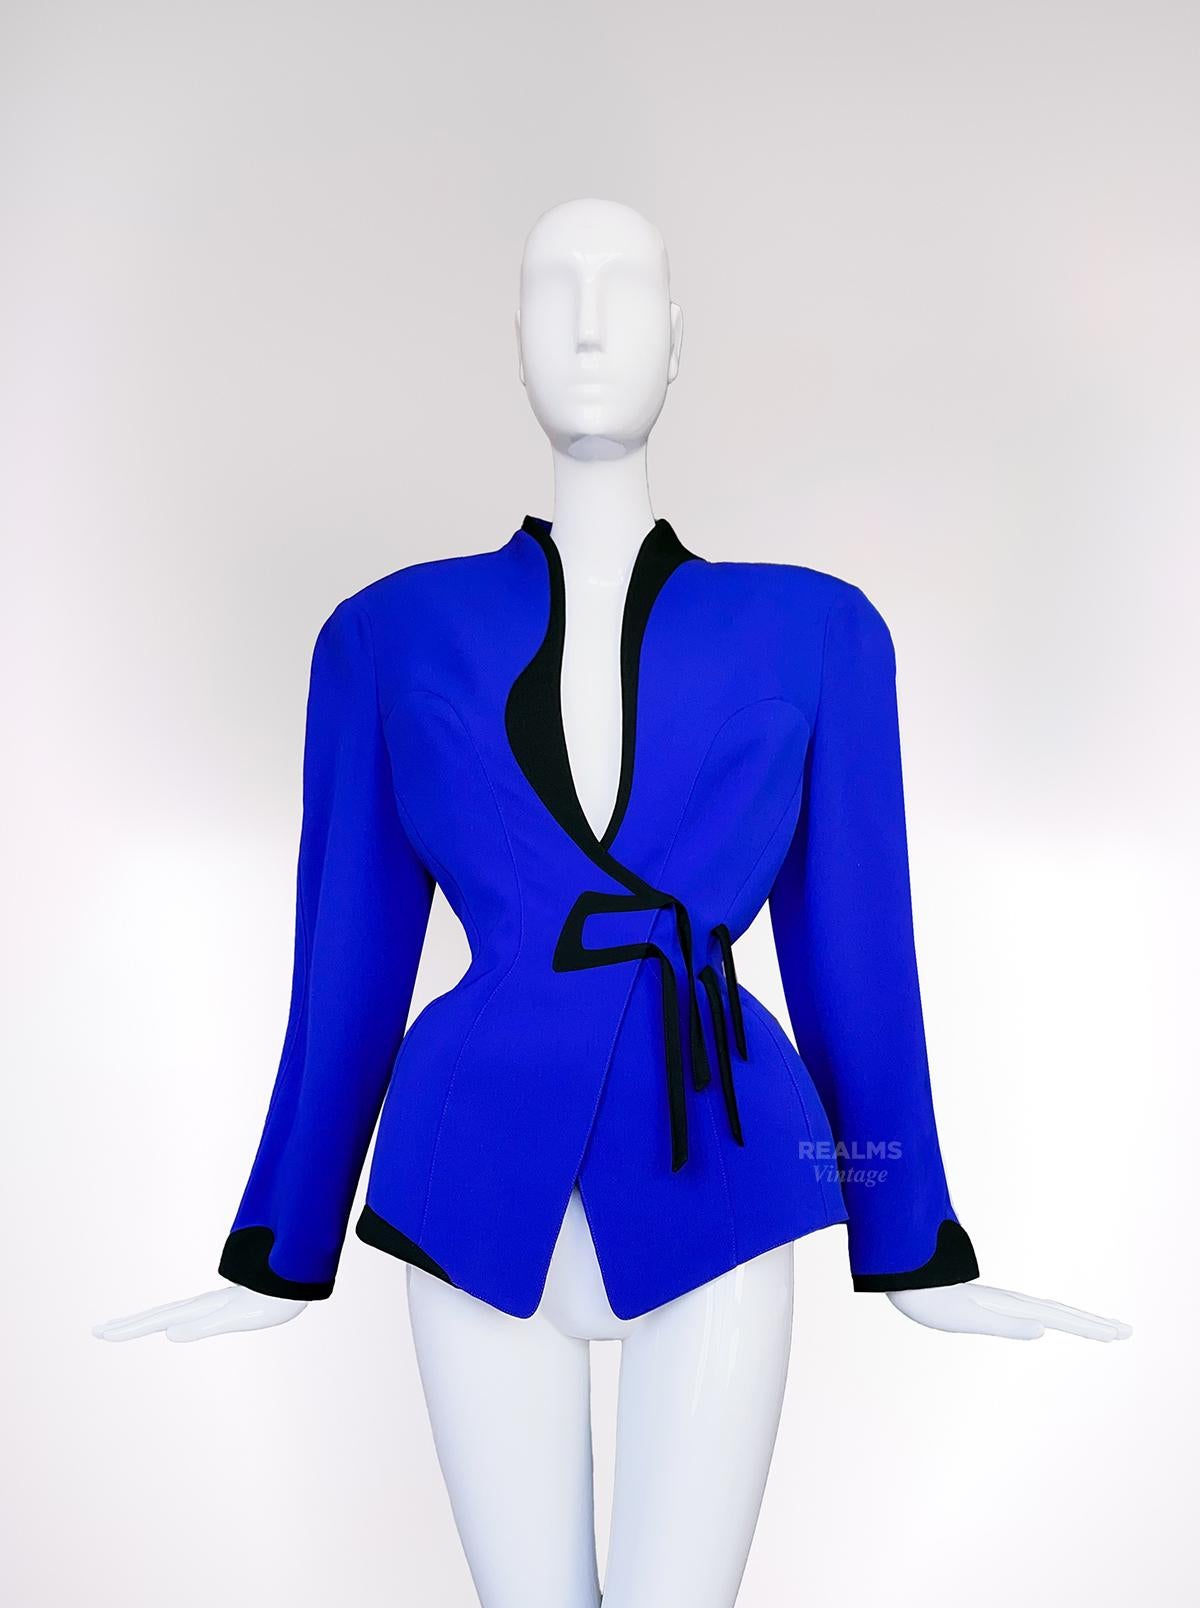 Thierry Mugler 1987 Rare Archival Electric Blue Jacket For Sale 4